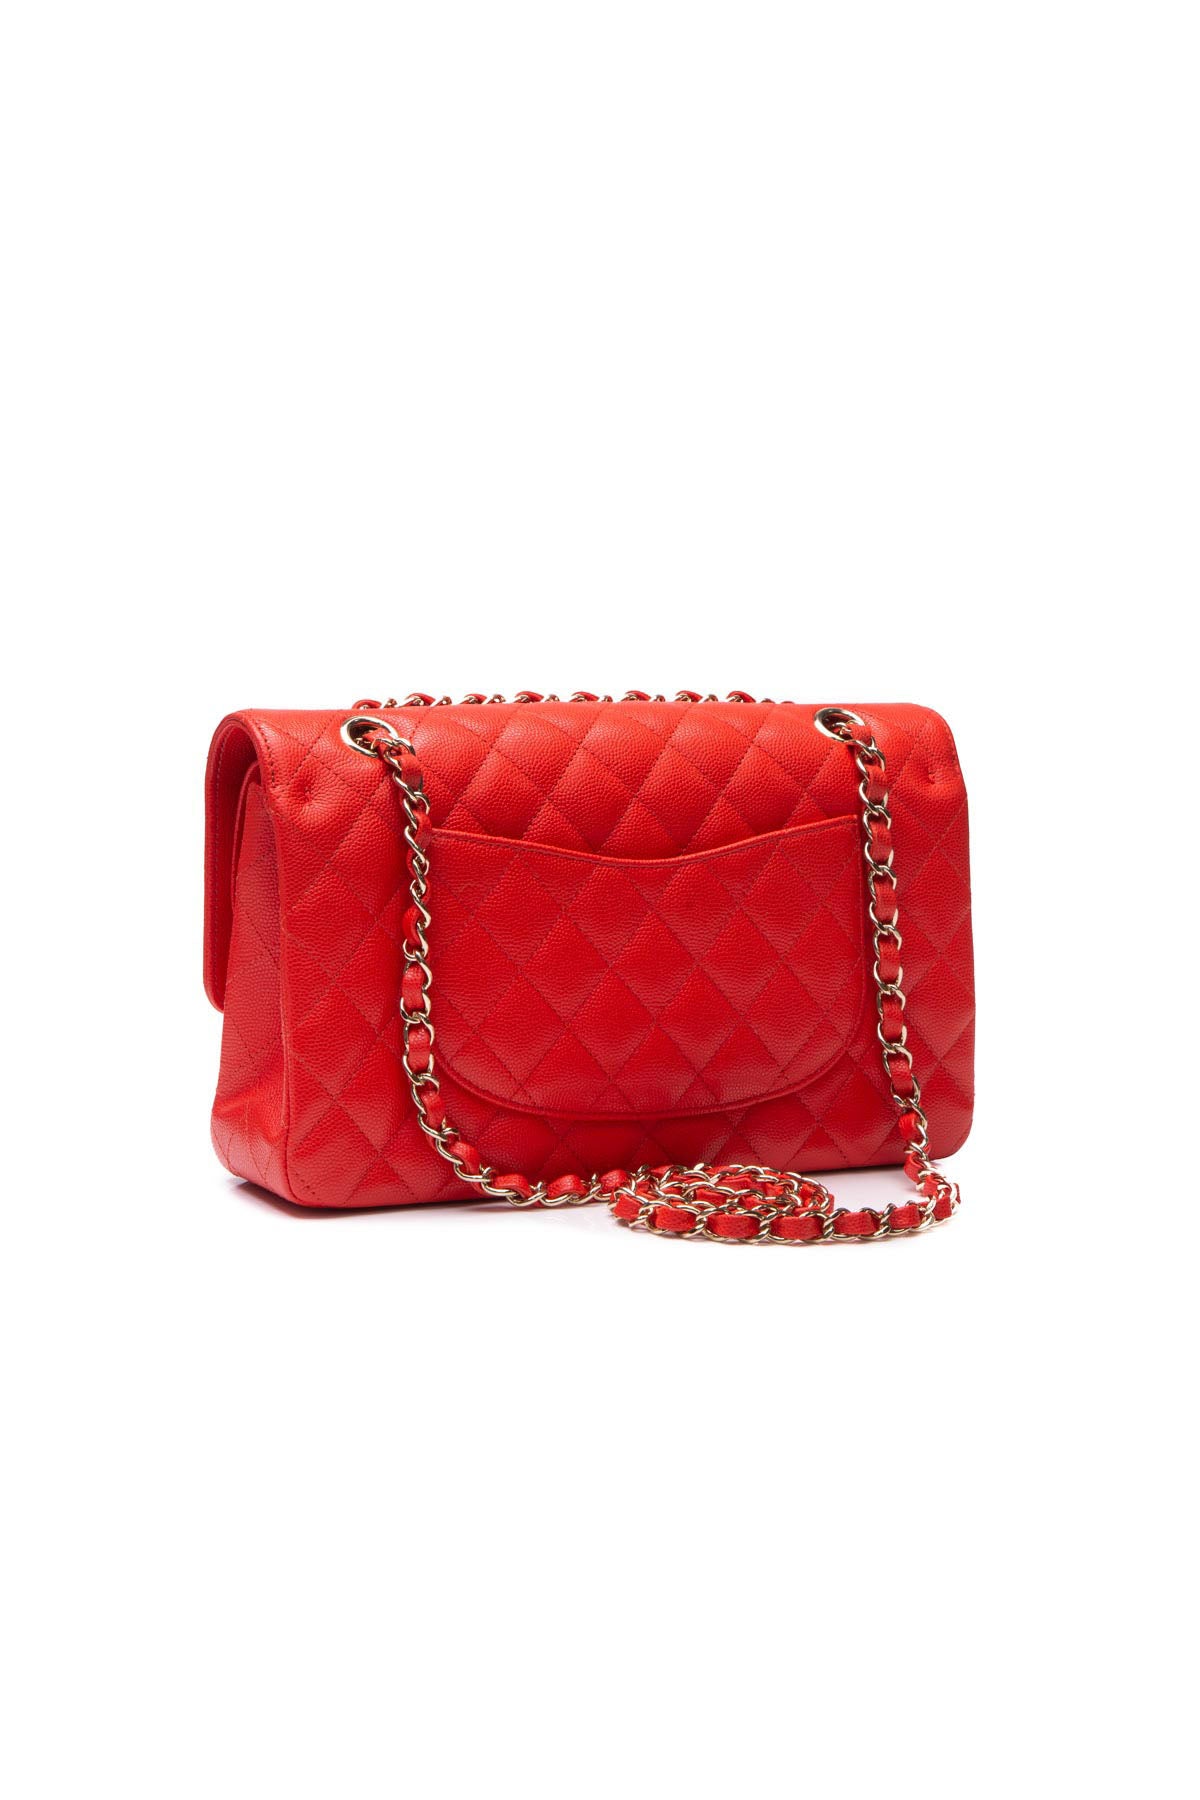 Buying Chanel's Double Flap Bag Secondhand Just Got More Competitive.  Here's How To Score It